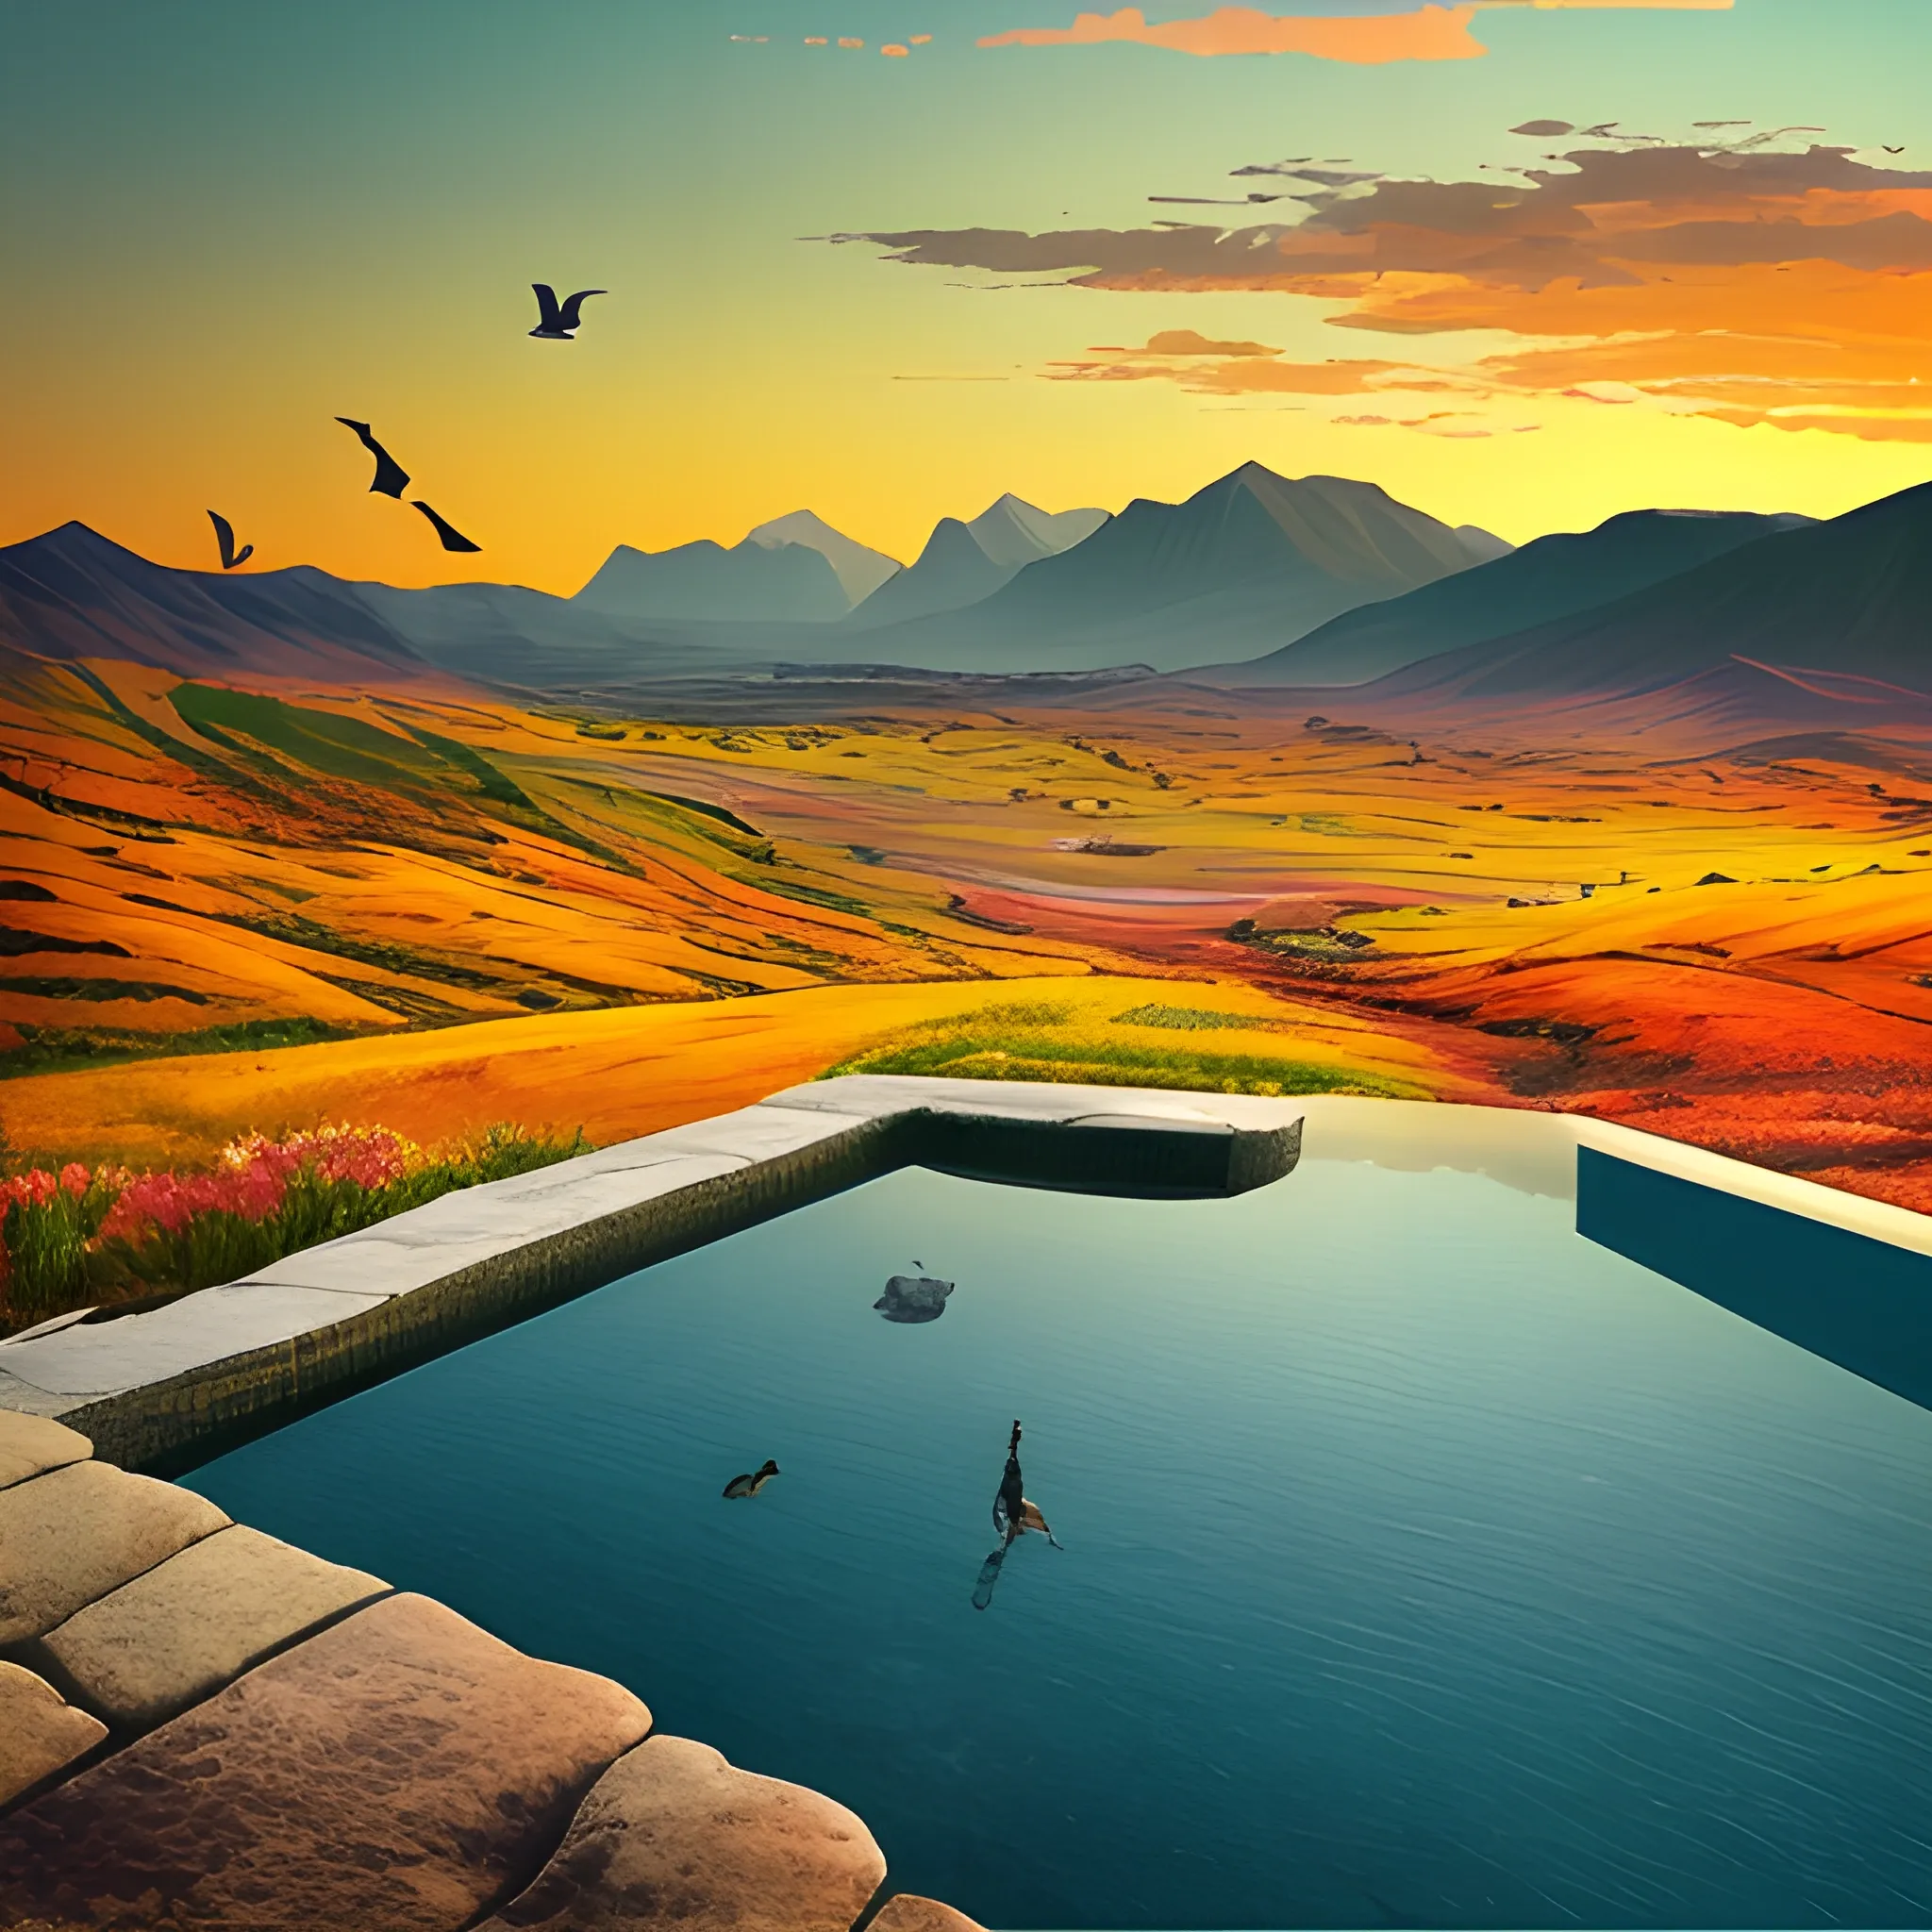 An awe-inspiring landscape showing a mountain range with rolling hills in the foreground. The overall vibe should be adventurous and wanderlust-evoking, with warm tones of oranges and yellows in the sky to convey a sunset or sunrise. A few birds soaring in the sky would add a touch of liveliness to the scene, and a human figure gazing at the view from an infinity pool thinking that the past is in your head and the future is in your hand on the foreground would help to emphasize the vastness of the landscape. 